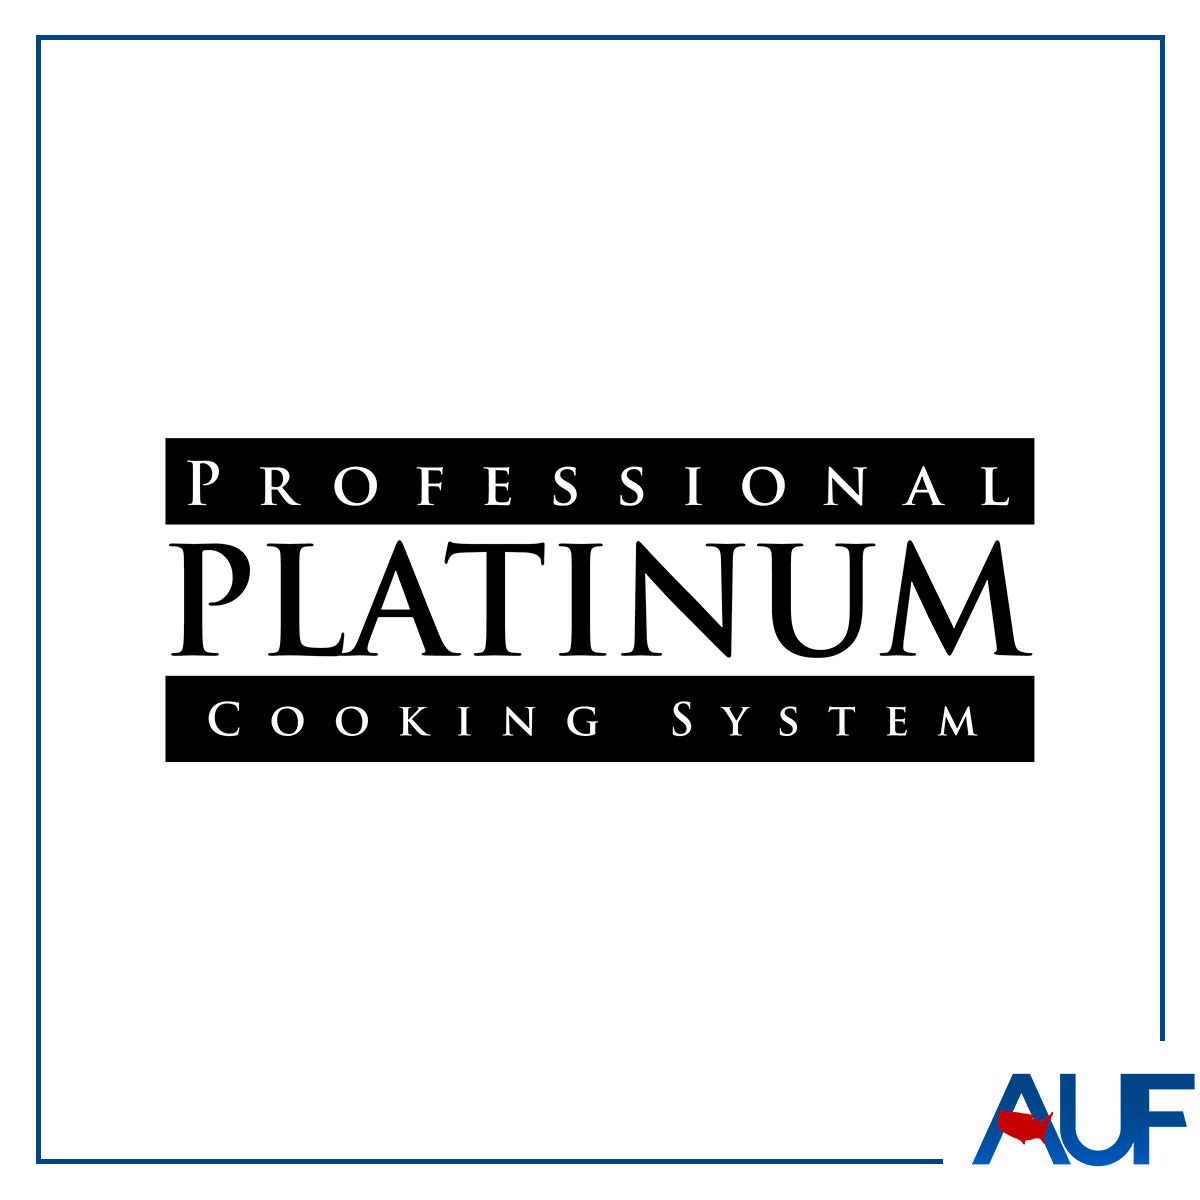 Multiple Pictures: Professional Platinum Cooking System